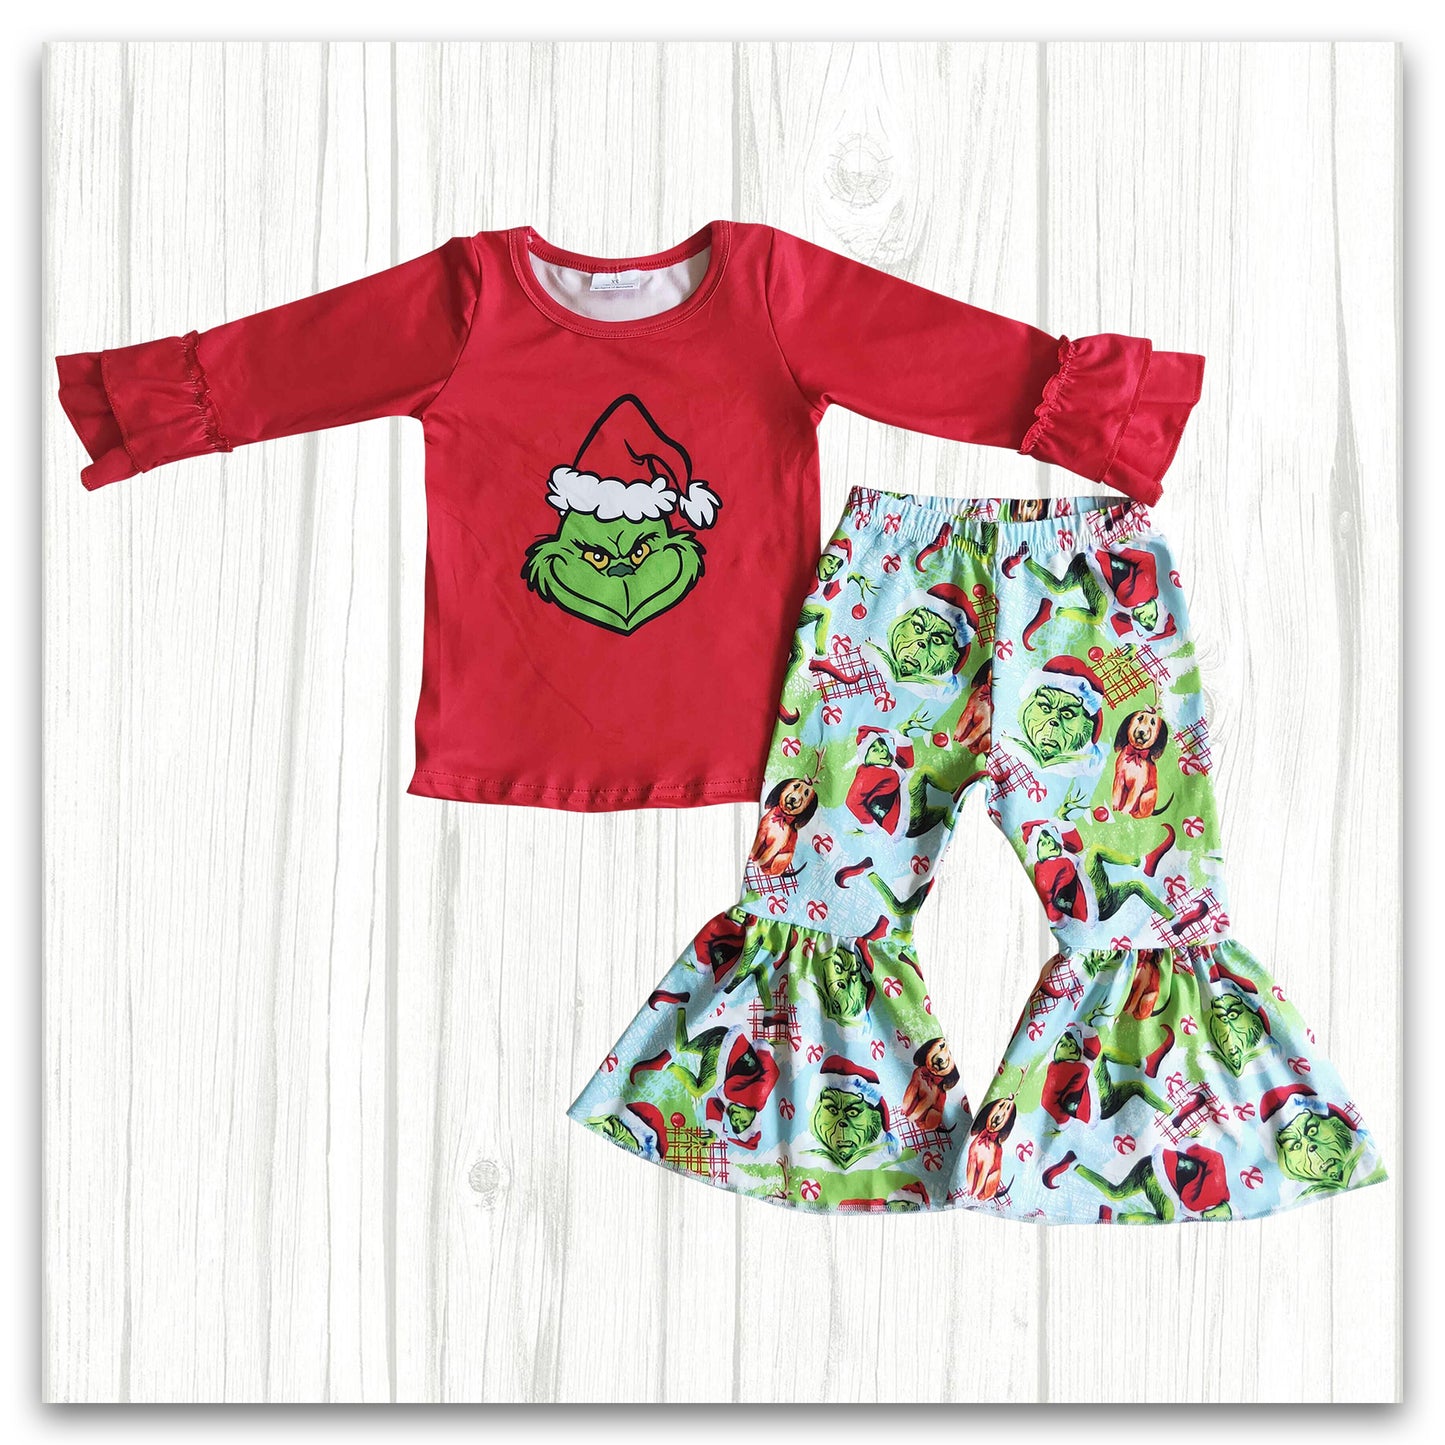 Red Shirt Grinchey Clothes Set for Christmas Girl's Clothing